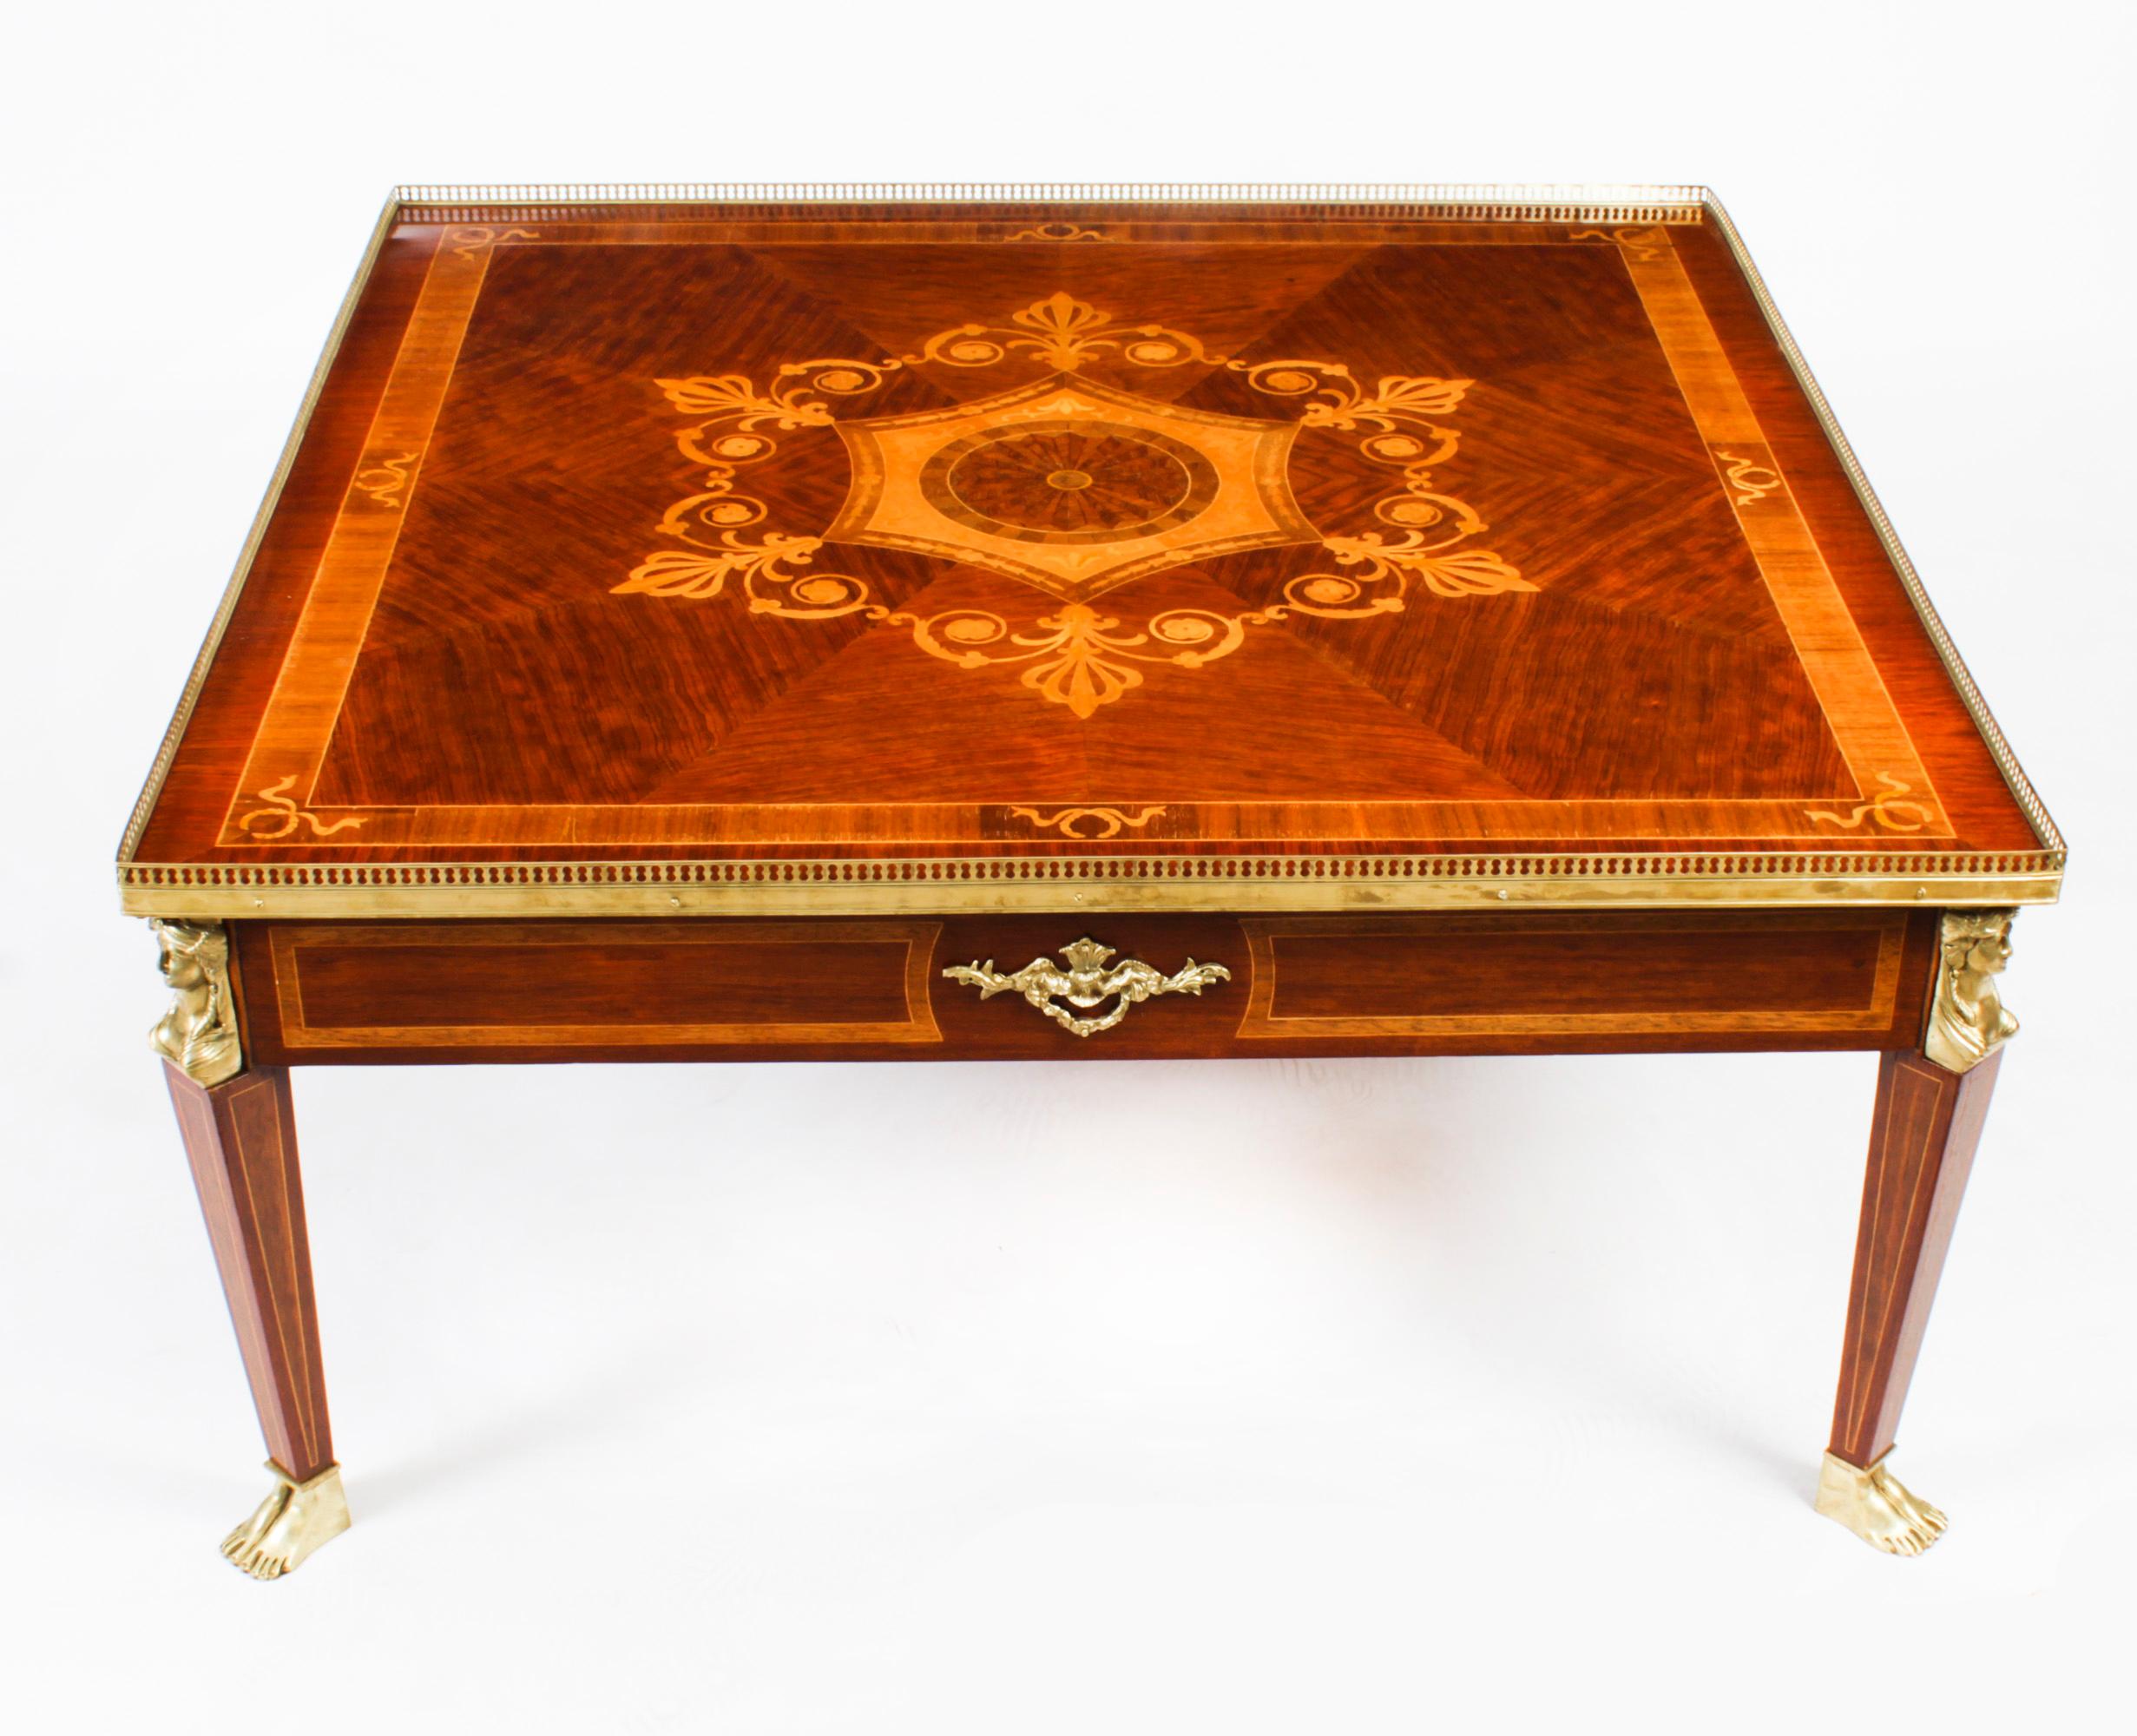 This is a stunning Vintage walnut and marquetry inlaid French coffee table, in the elegant Empire style, with fabulous decorative ormolu mounts, dating from the last quarter of the 20th century.

It has stunning ormolu decoration with mounts,